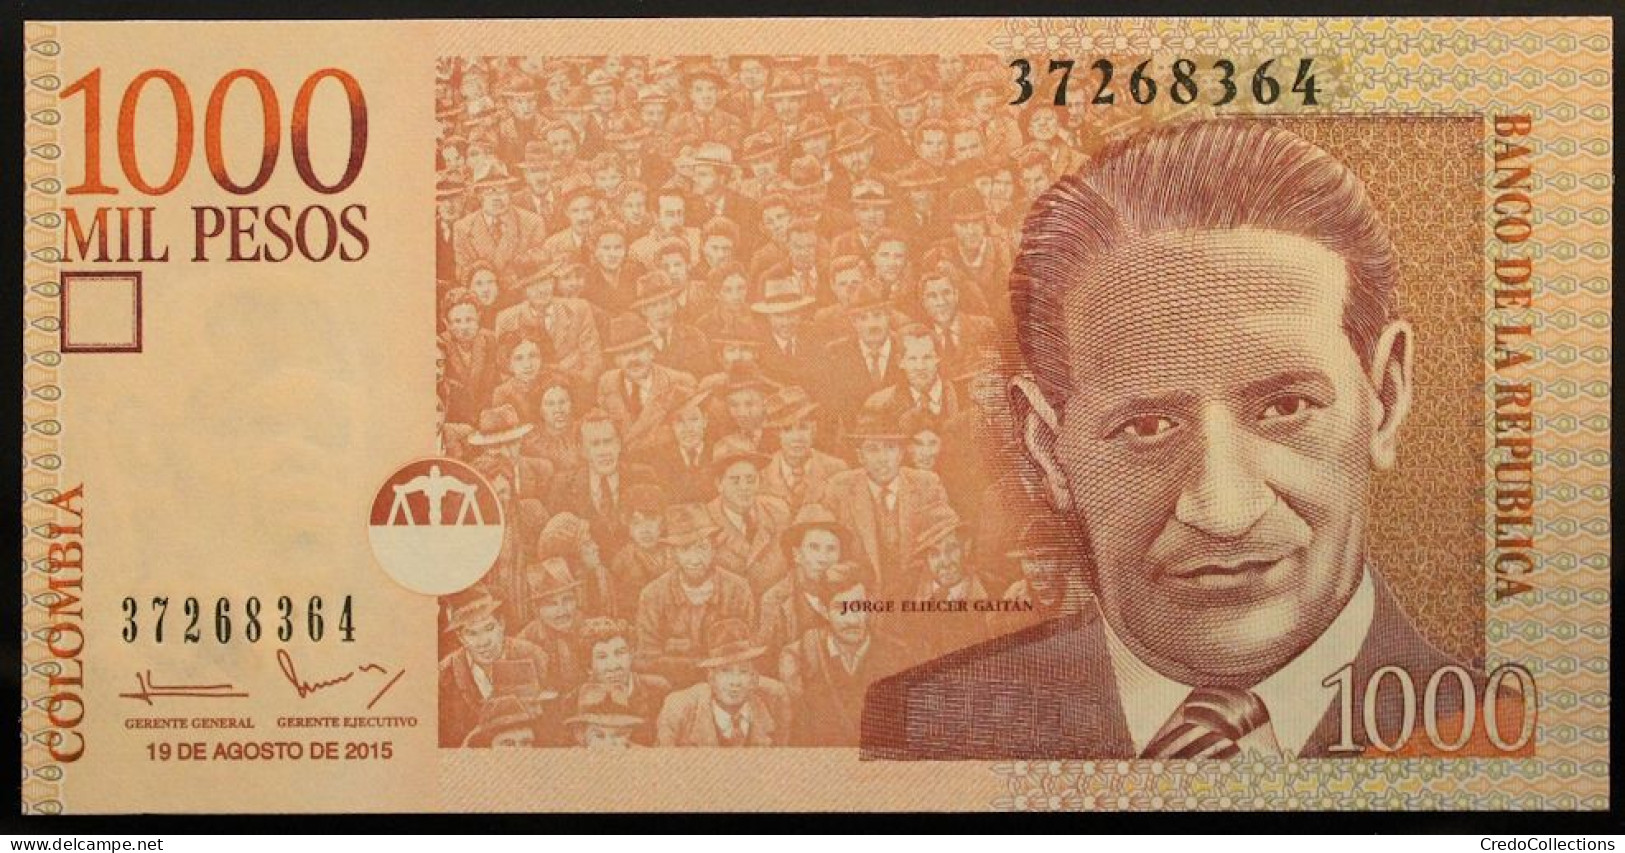 Colombie - 1000 Pesos - 2015 - PICK 456t - NEUF - Colombia